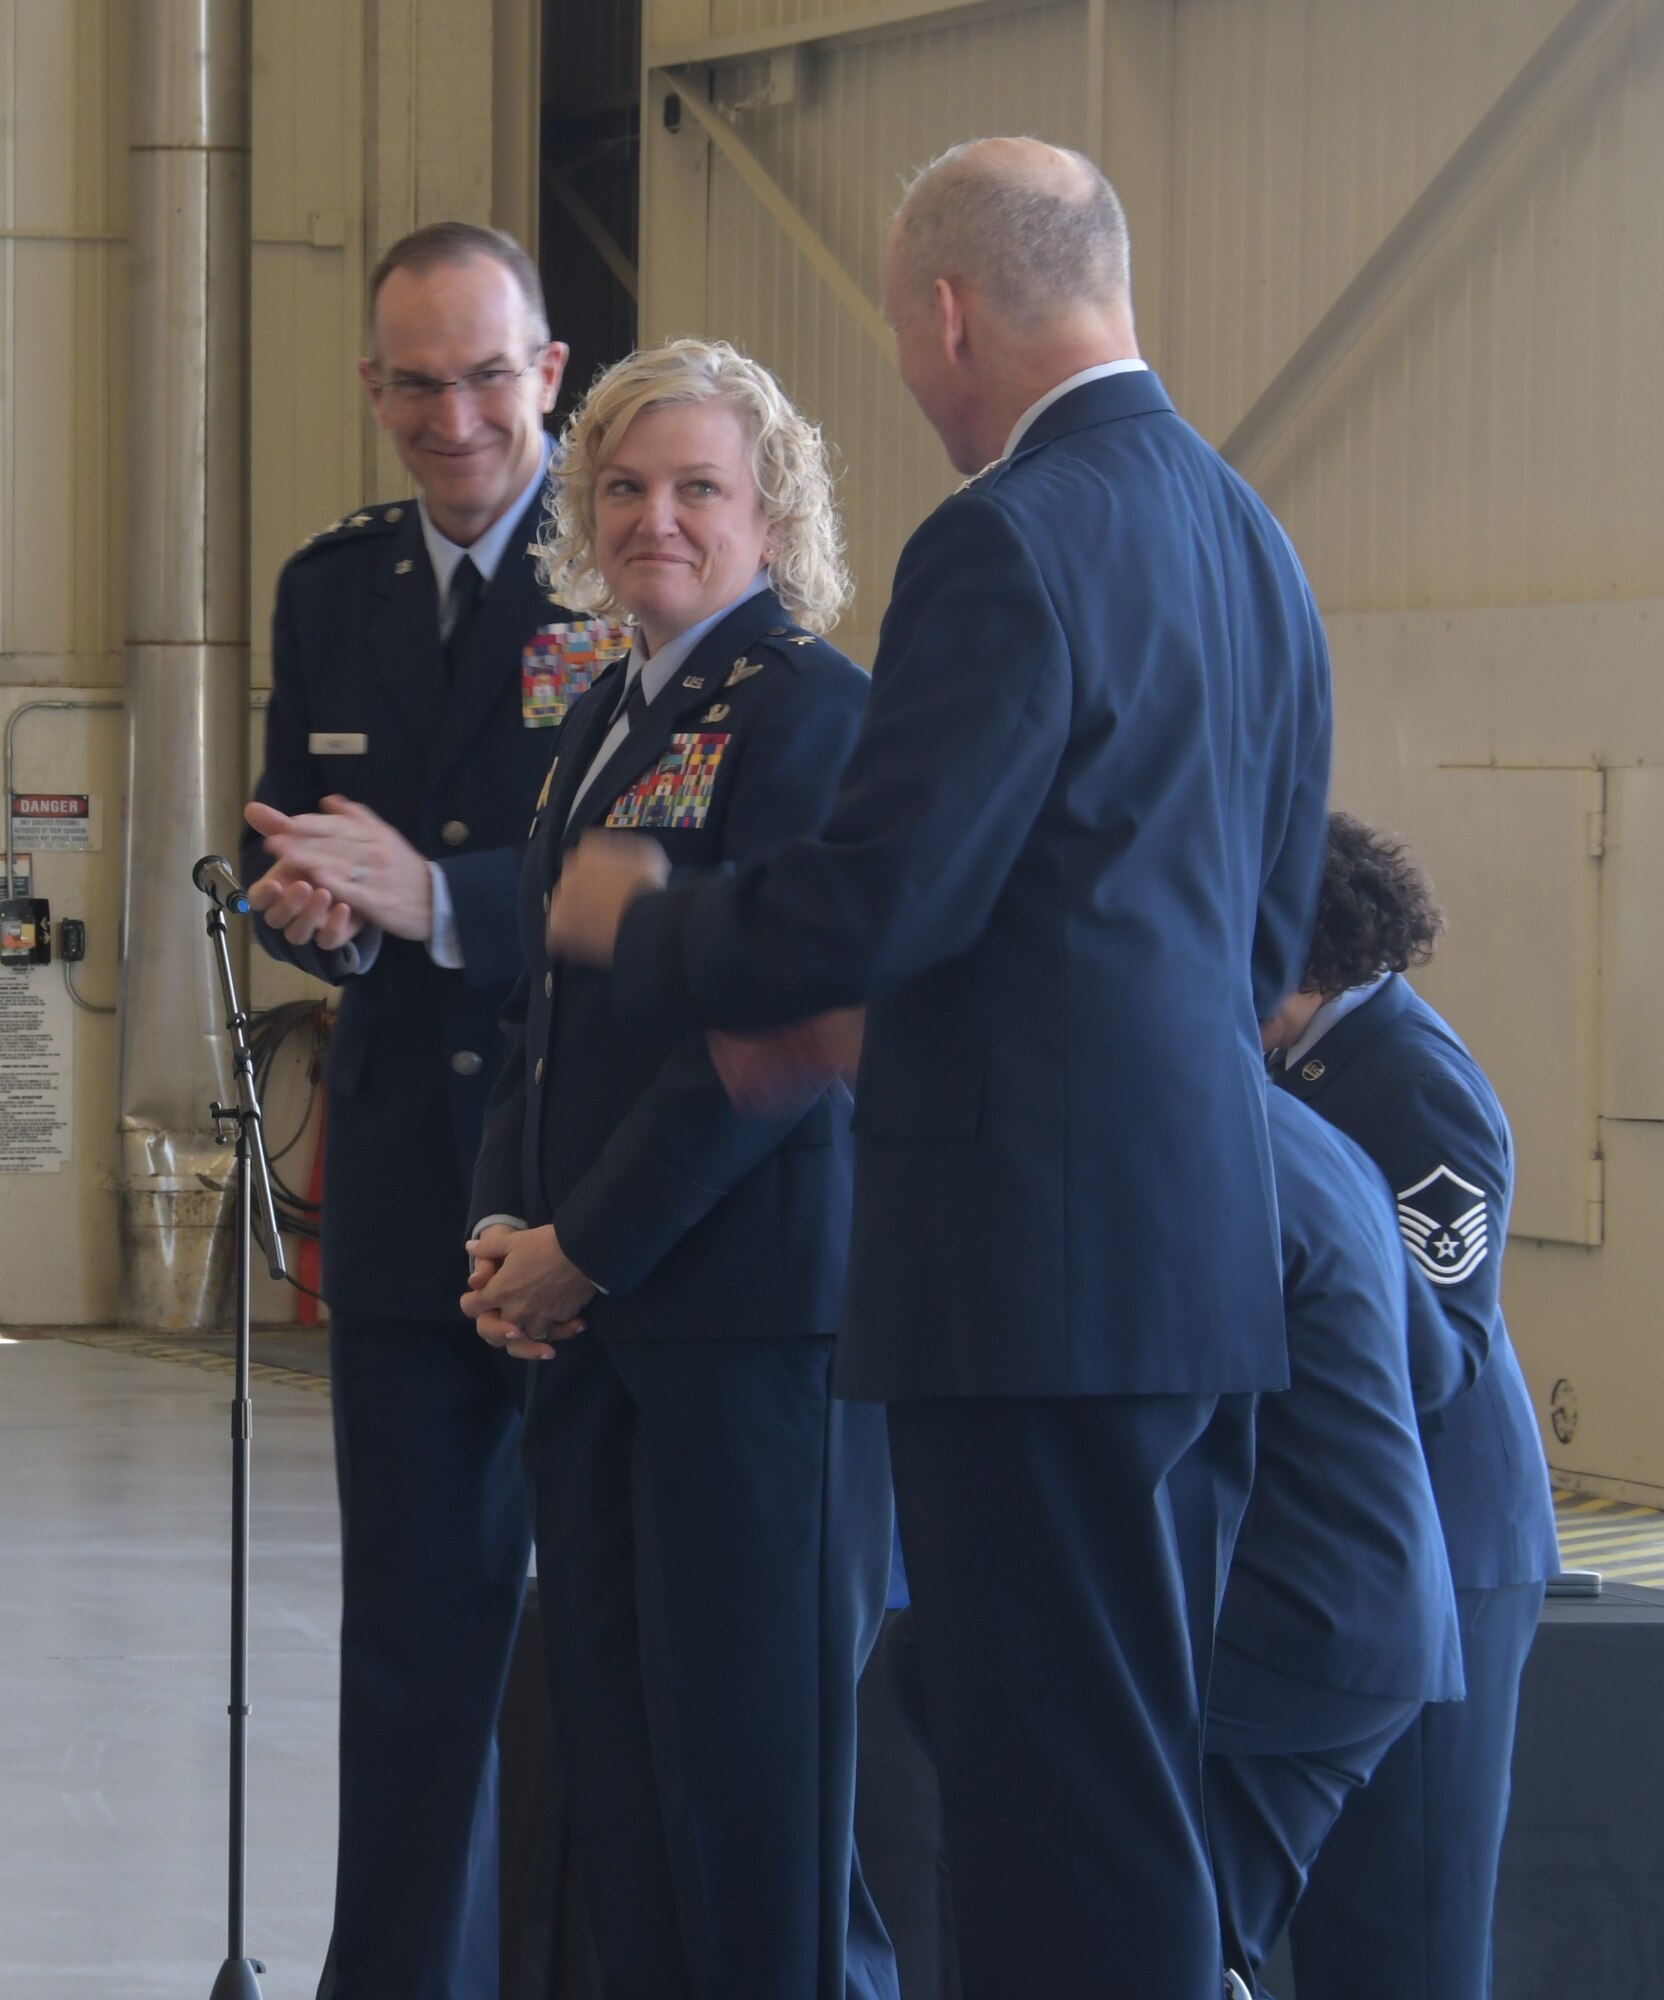 Air Force Reserve Commander and Chief of the Air Force Reserve Lt. Gen. John P. Healy and outgoing 22nd Air Force commander, Maj. Gen. Bret C. Larson applaud incoming commander Brig. Gen. Melissa A. Coburn following their change of command ceremony at Dobbins Air Reserve Base, Georgia, April 2, 2023.